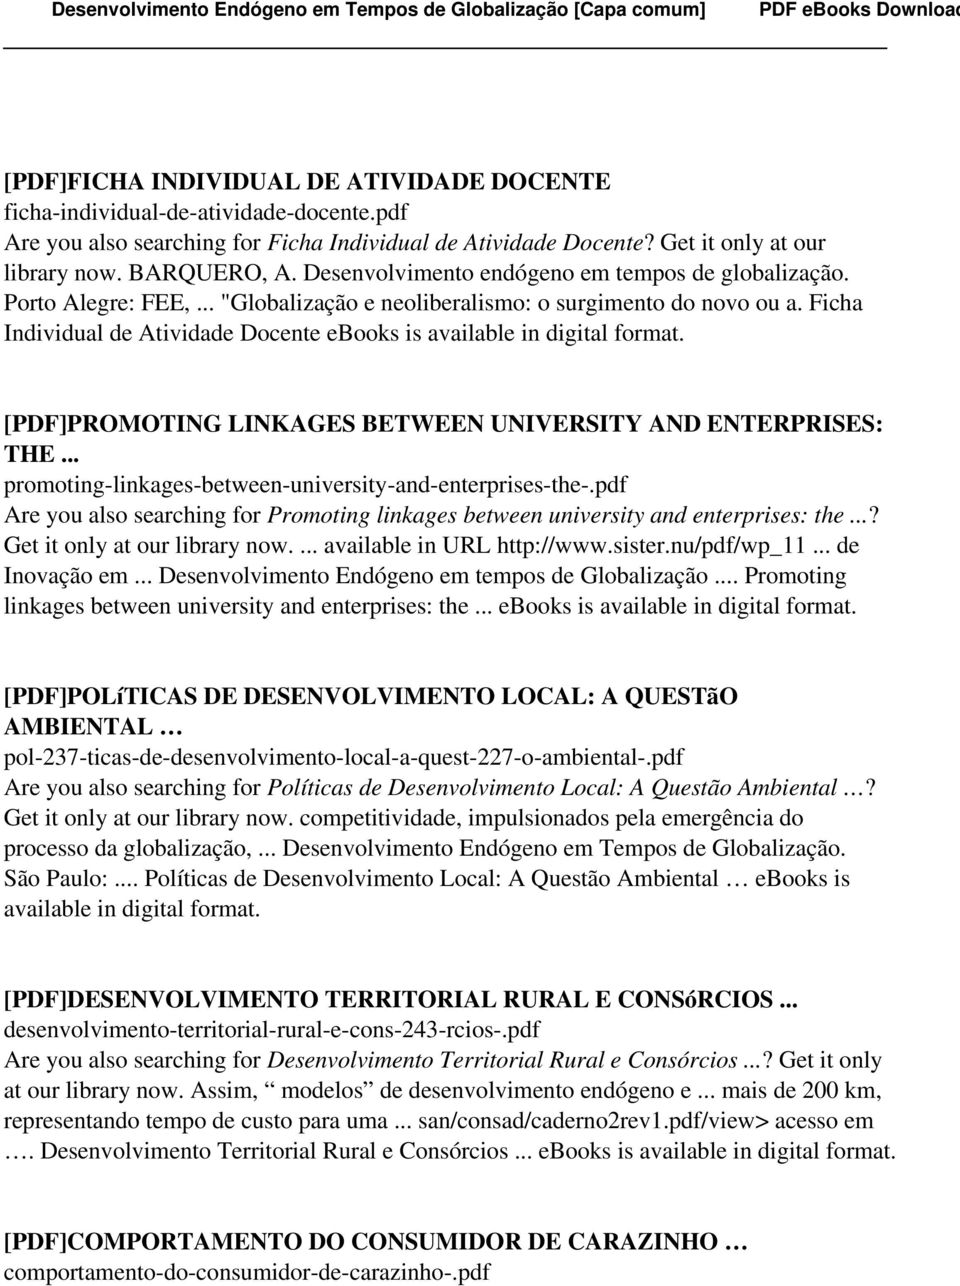 Ficha Individual de Atividade Docente ebooks is [PDF]PROMOTING LINKAGES BETWEEN UNIVERSITY AND ENTERPRISES: THE... promoting-linkages-between-university-and-enterprises-the-.